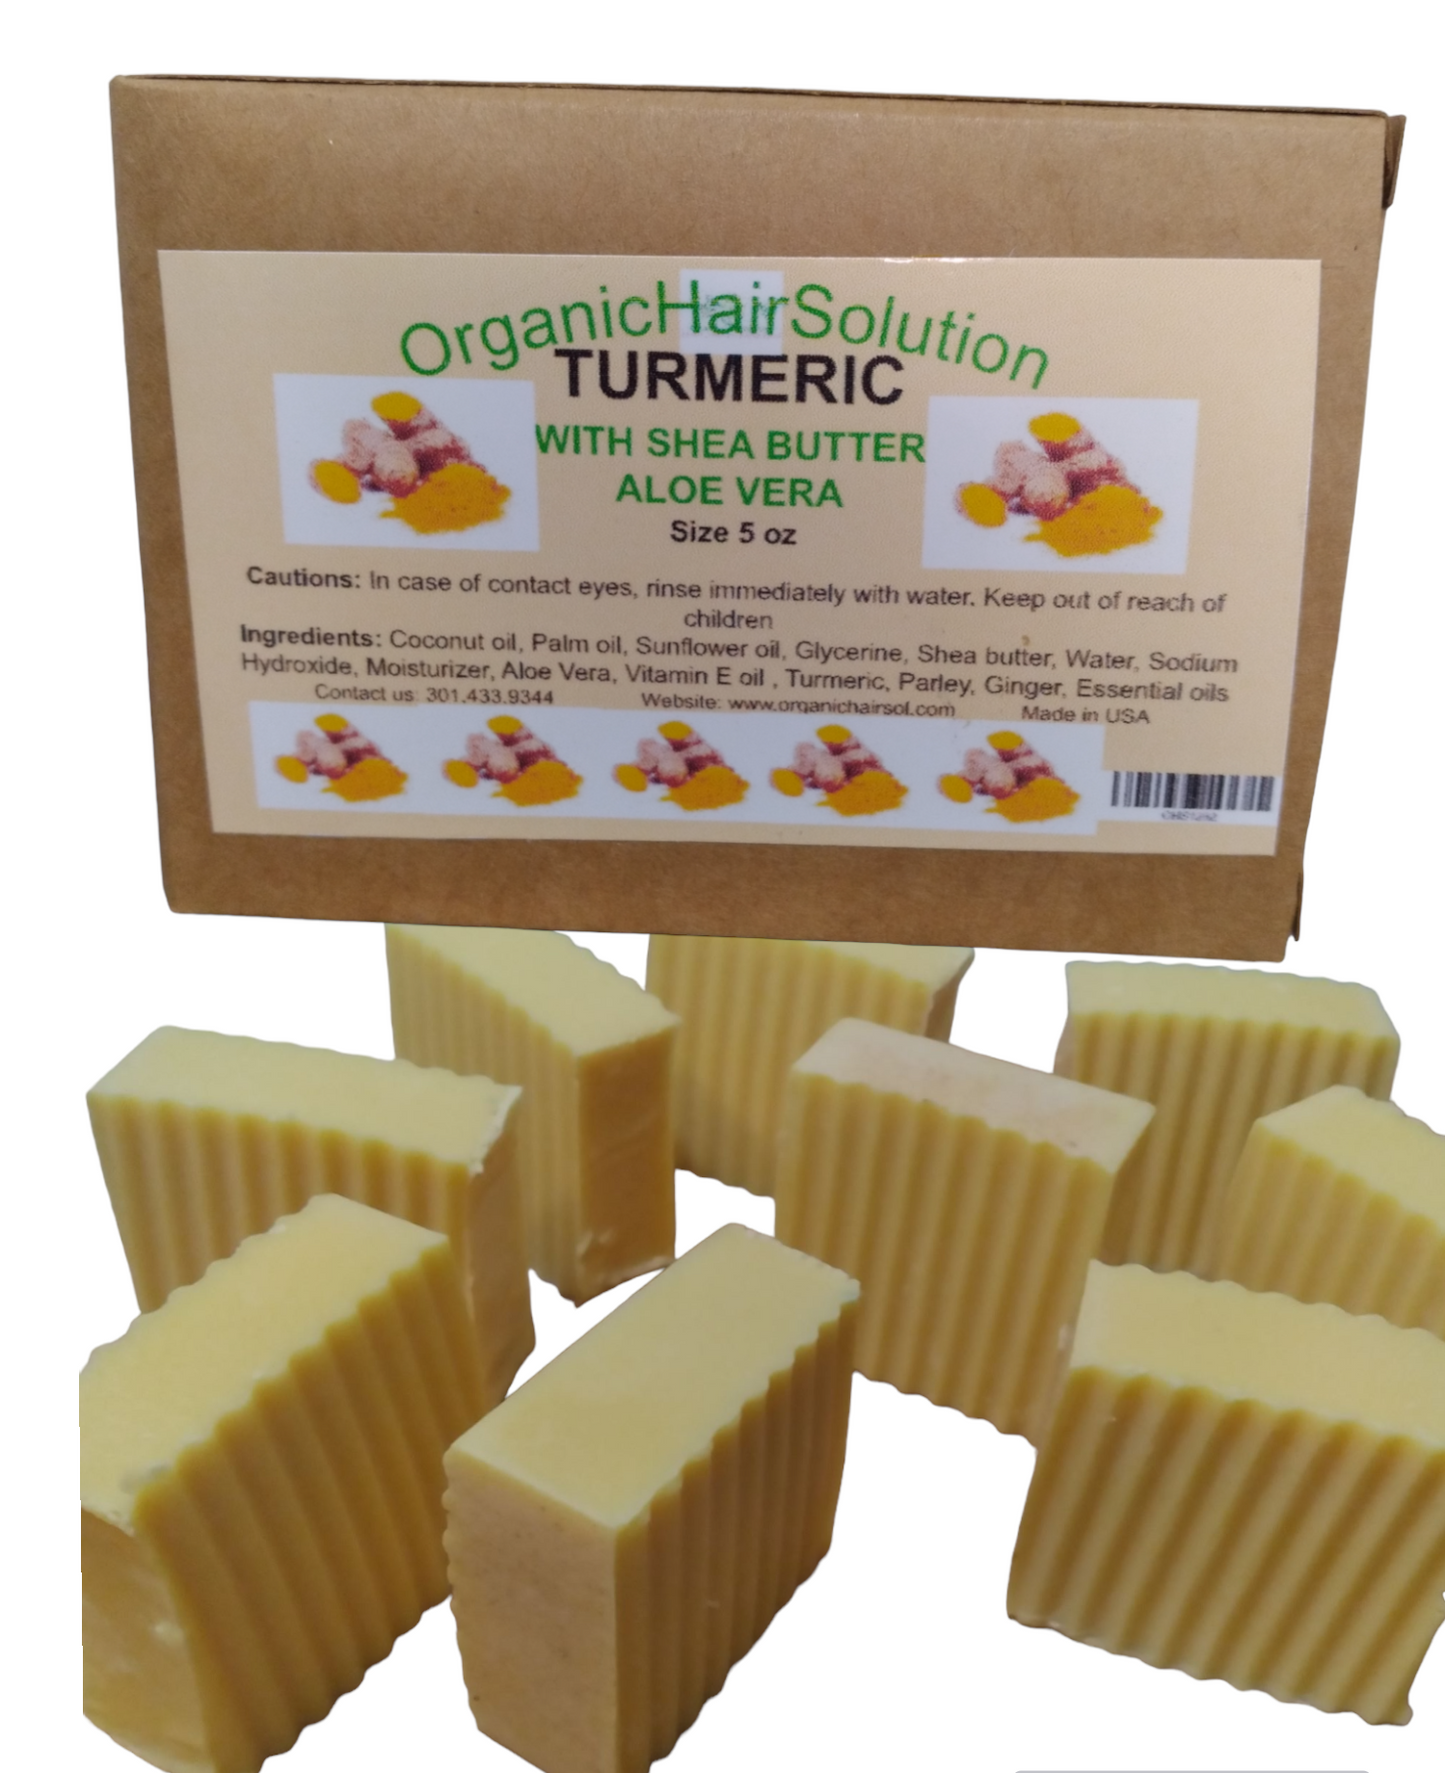 TURMERIC BAR SOAP-for Face & Body With Aloe Vera | Handmade | All Natural Turmeric Skin Soap - Reduces Acne, Heals Scars - Soap Detox Treatment for -All Skin Types - Organic Hair Solution, LLC